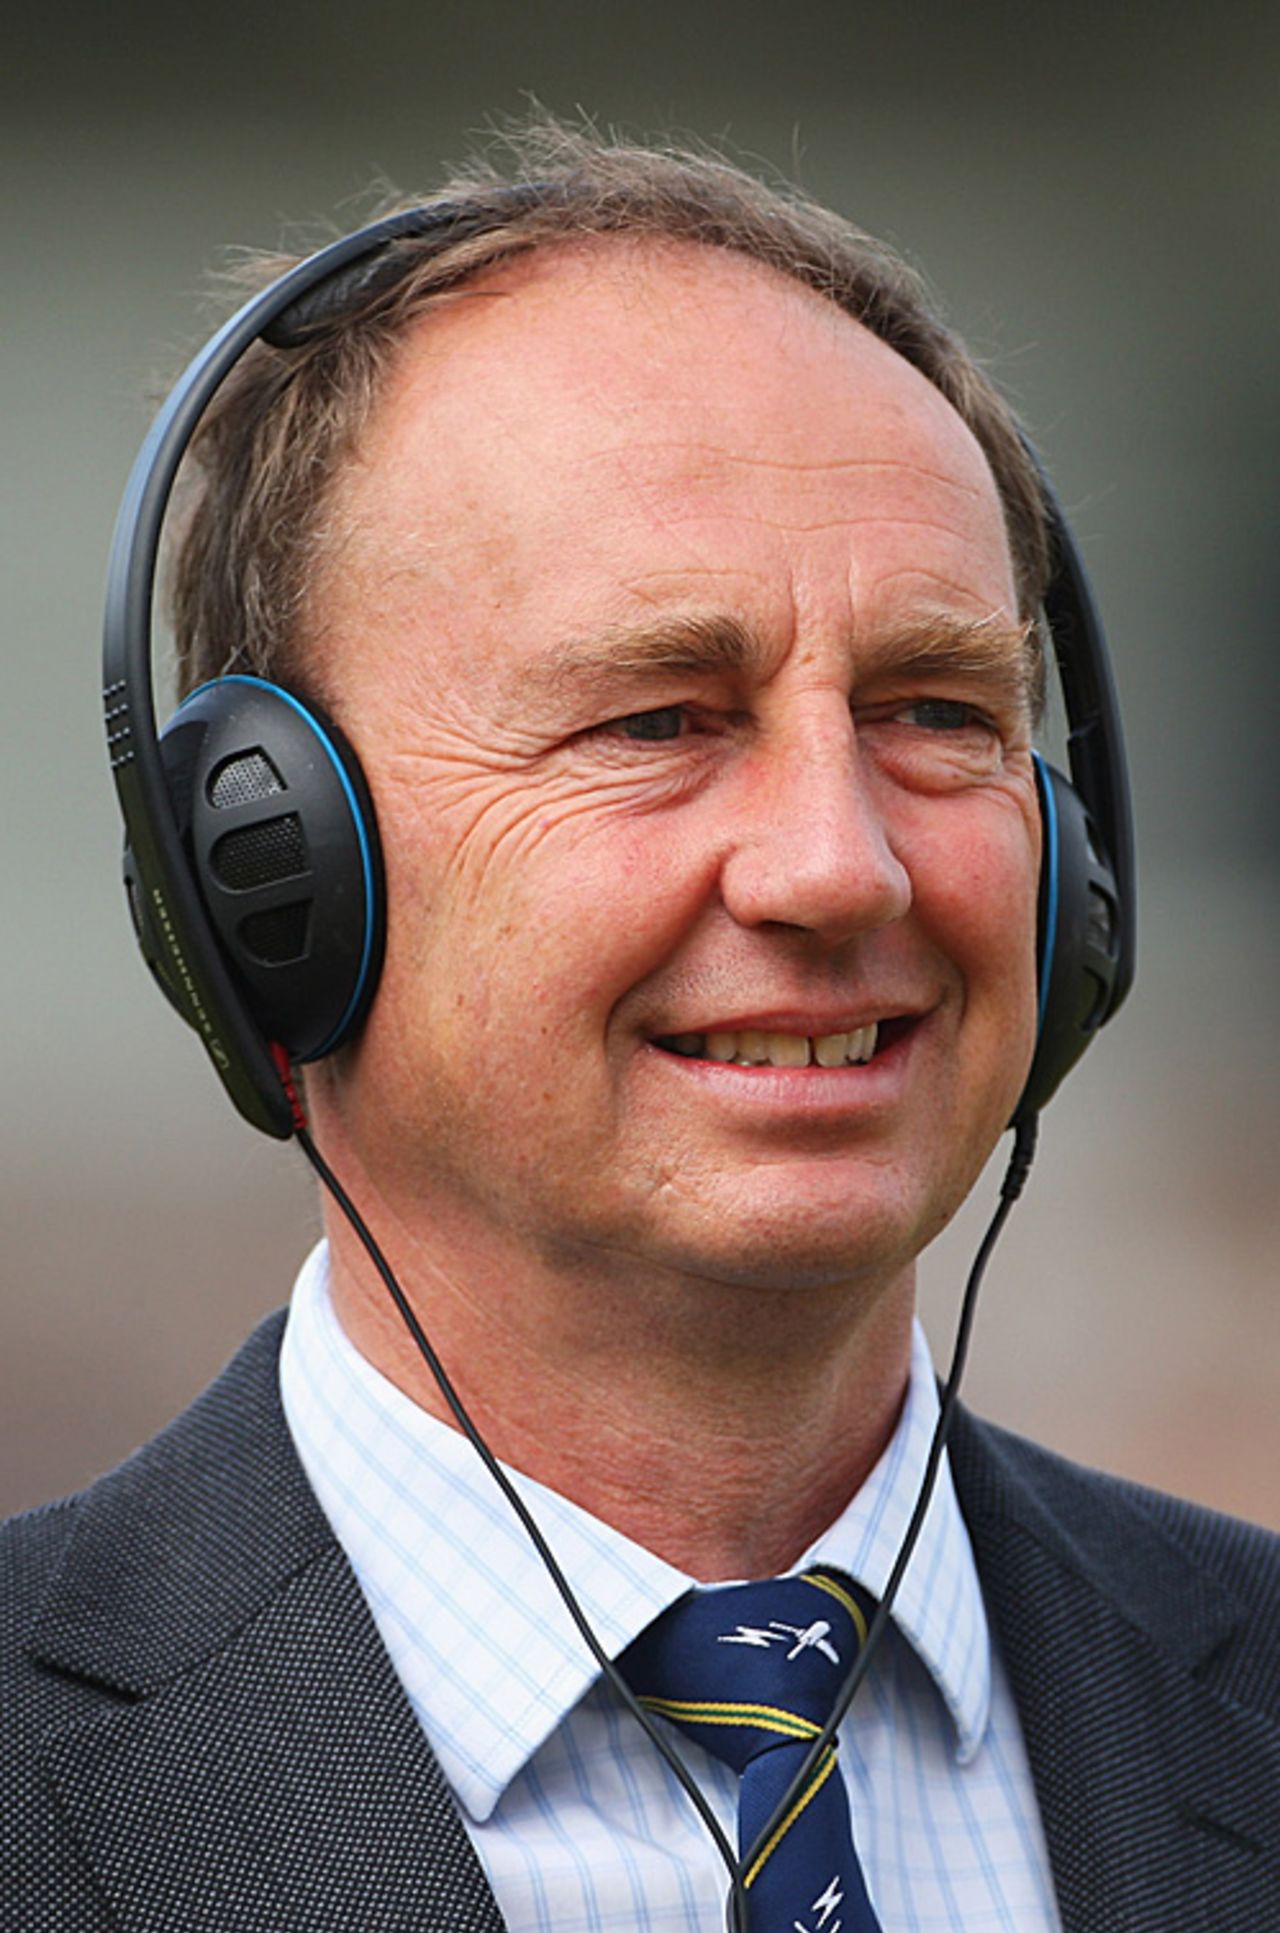 A portrait of Jonathan Agnew wearing headphones, England v West Indies, 1st Test, Lord's, May 6, 2009